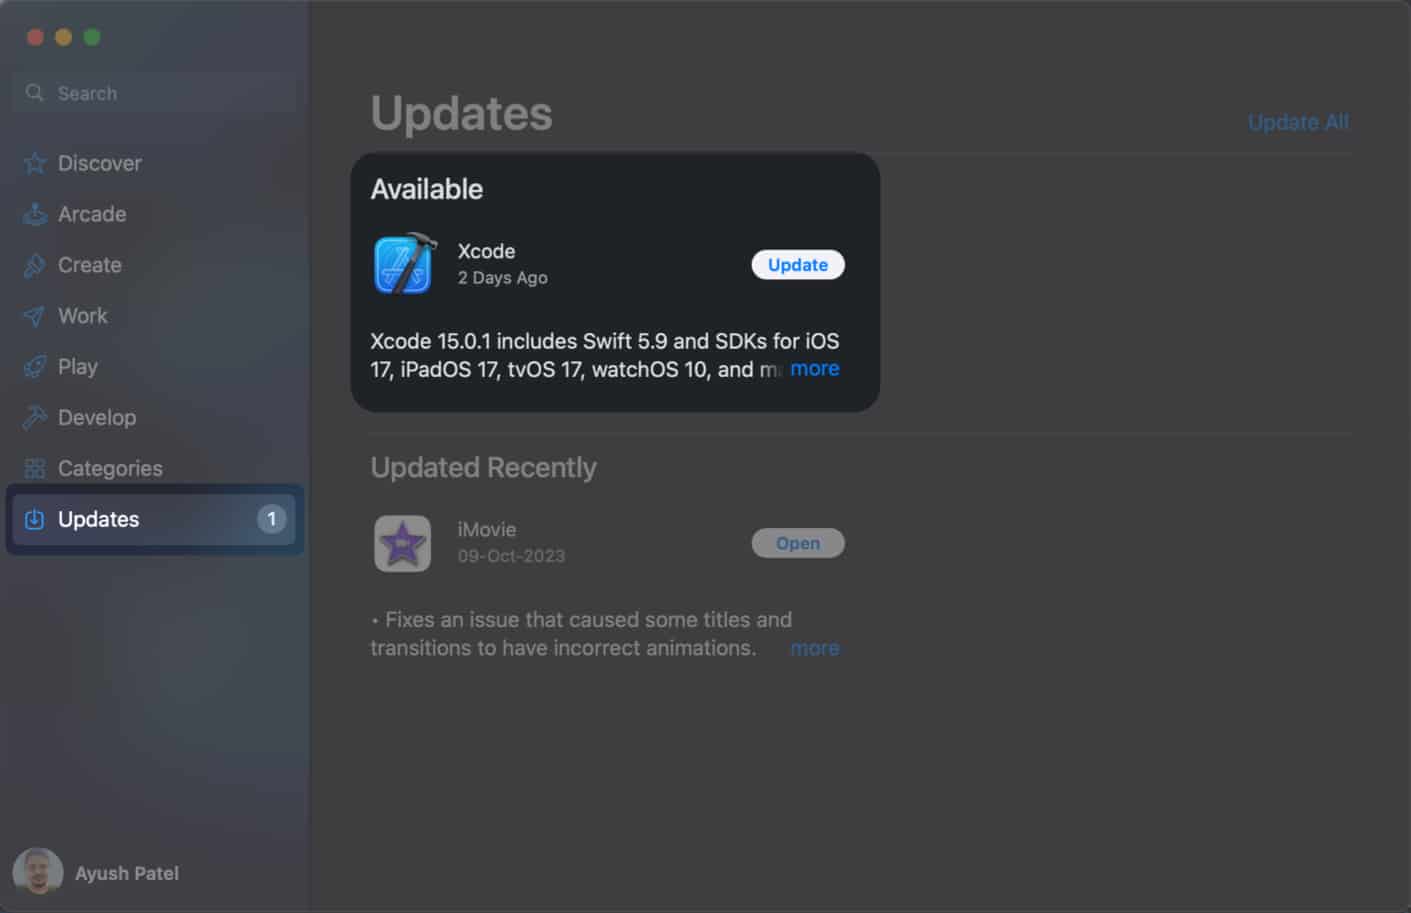 go-to-the-app-store-and-update-the-app